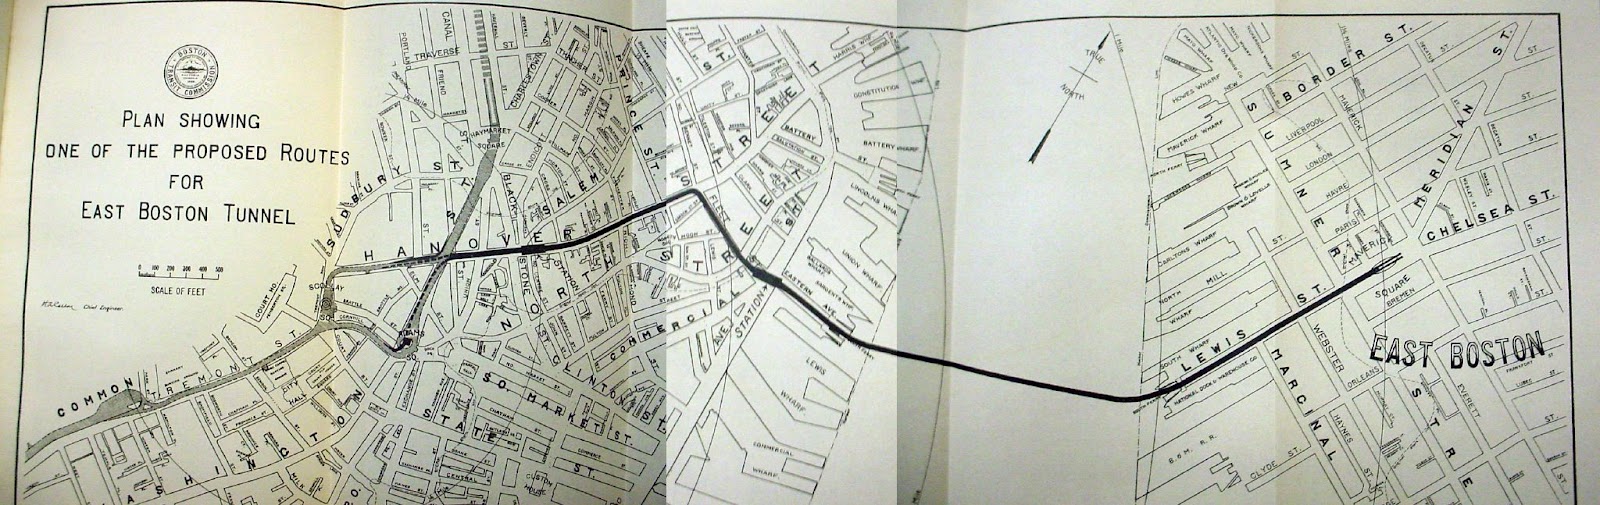 A paper map of the "Plan showing one of the proposed Routes for East Boston Tunnel", where the route extends out of the loop at Scollay Square, continues under Hanover street before cutting east under the Harbor, and arriving in East Boston under Lewis Street